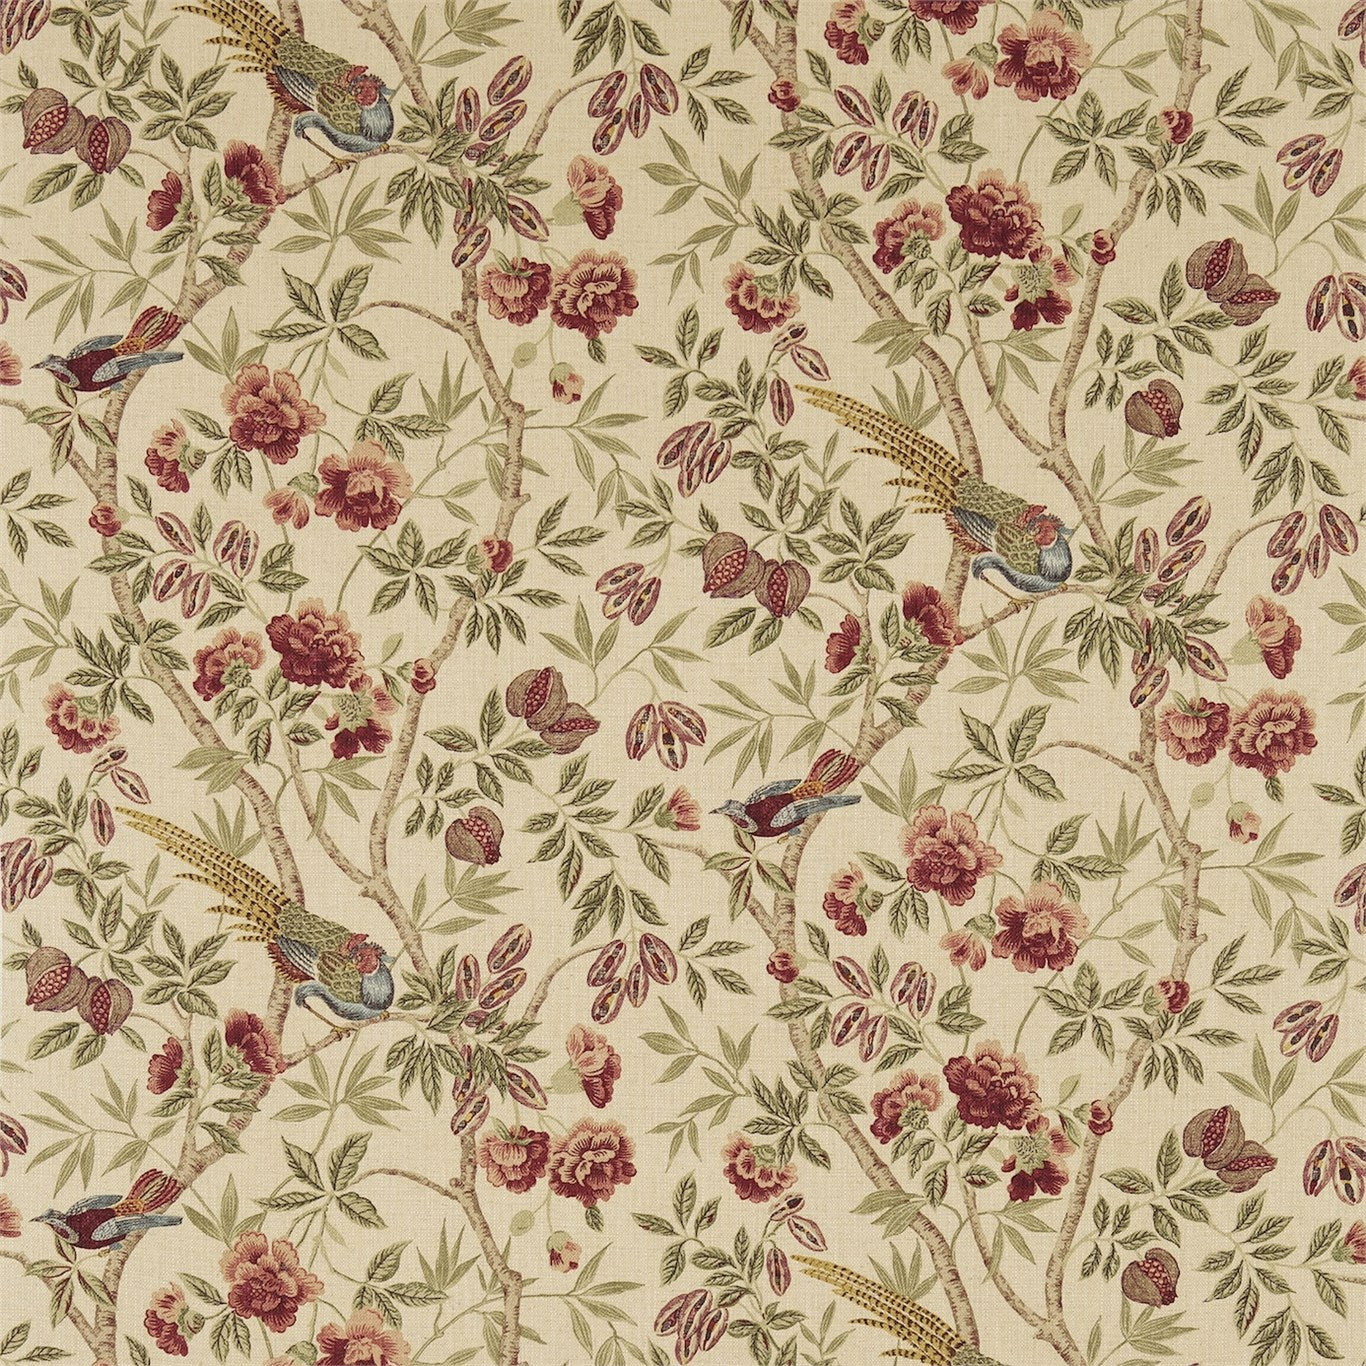 Abbeville Fabric by Sanderson - DFAB223970 - Russet/Sand